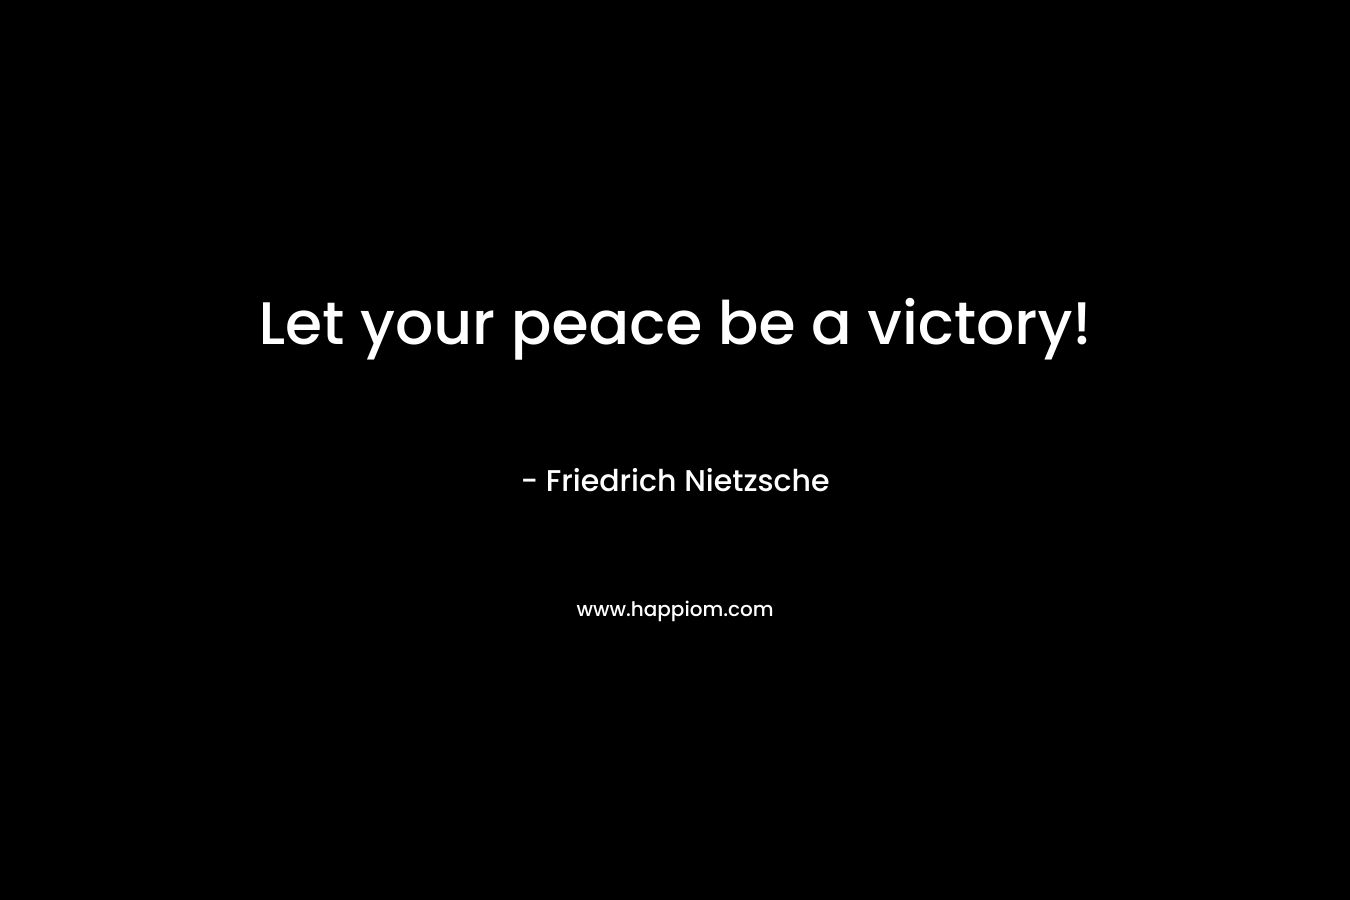 Let your peace be a victory!